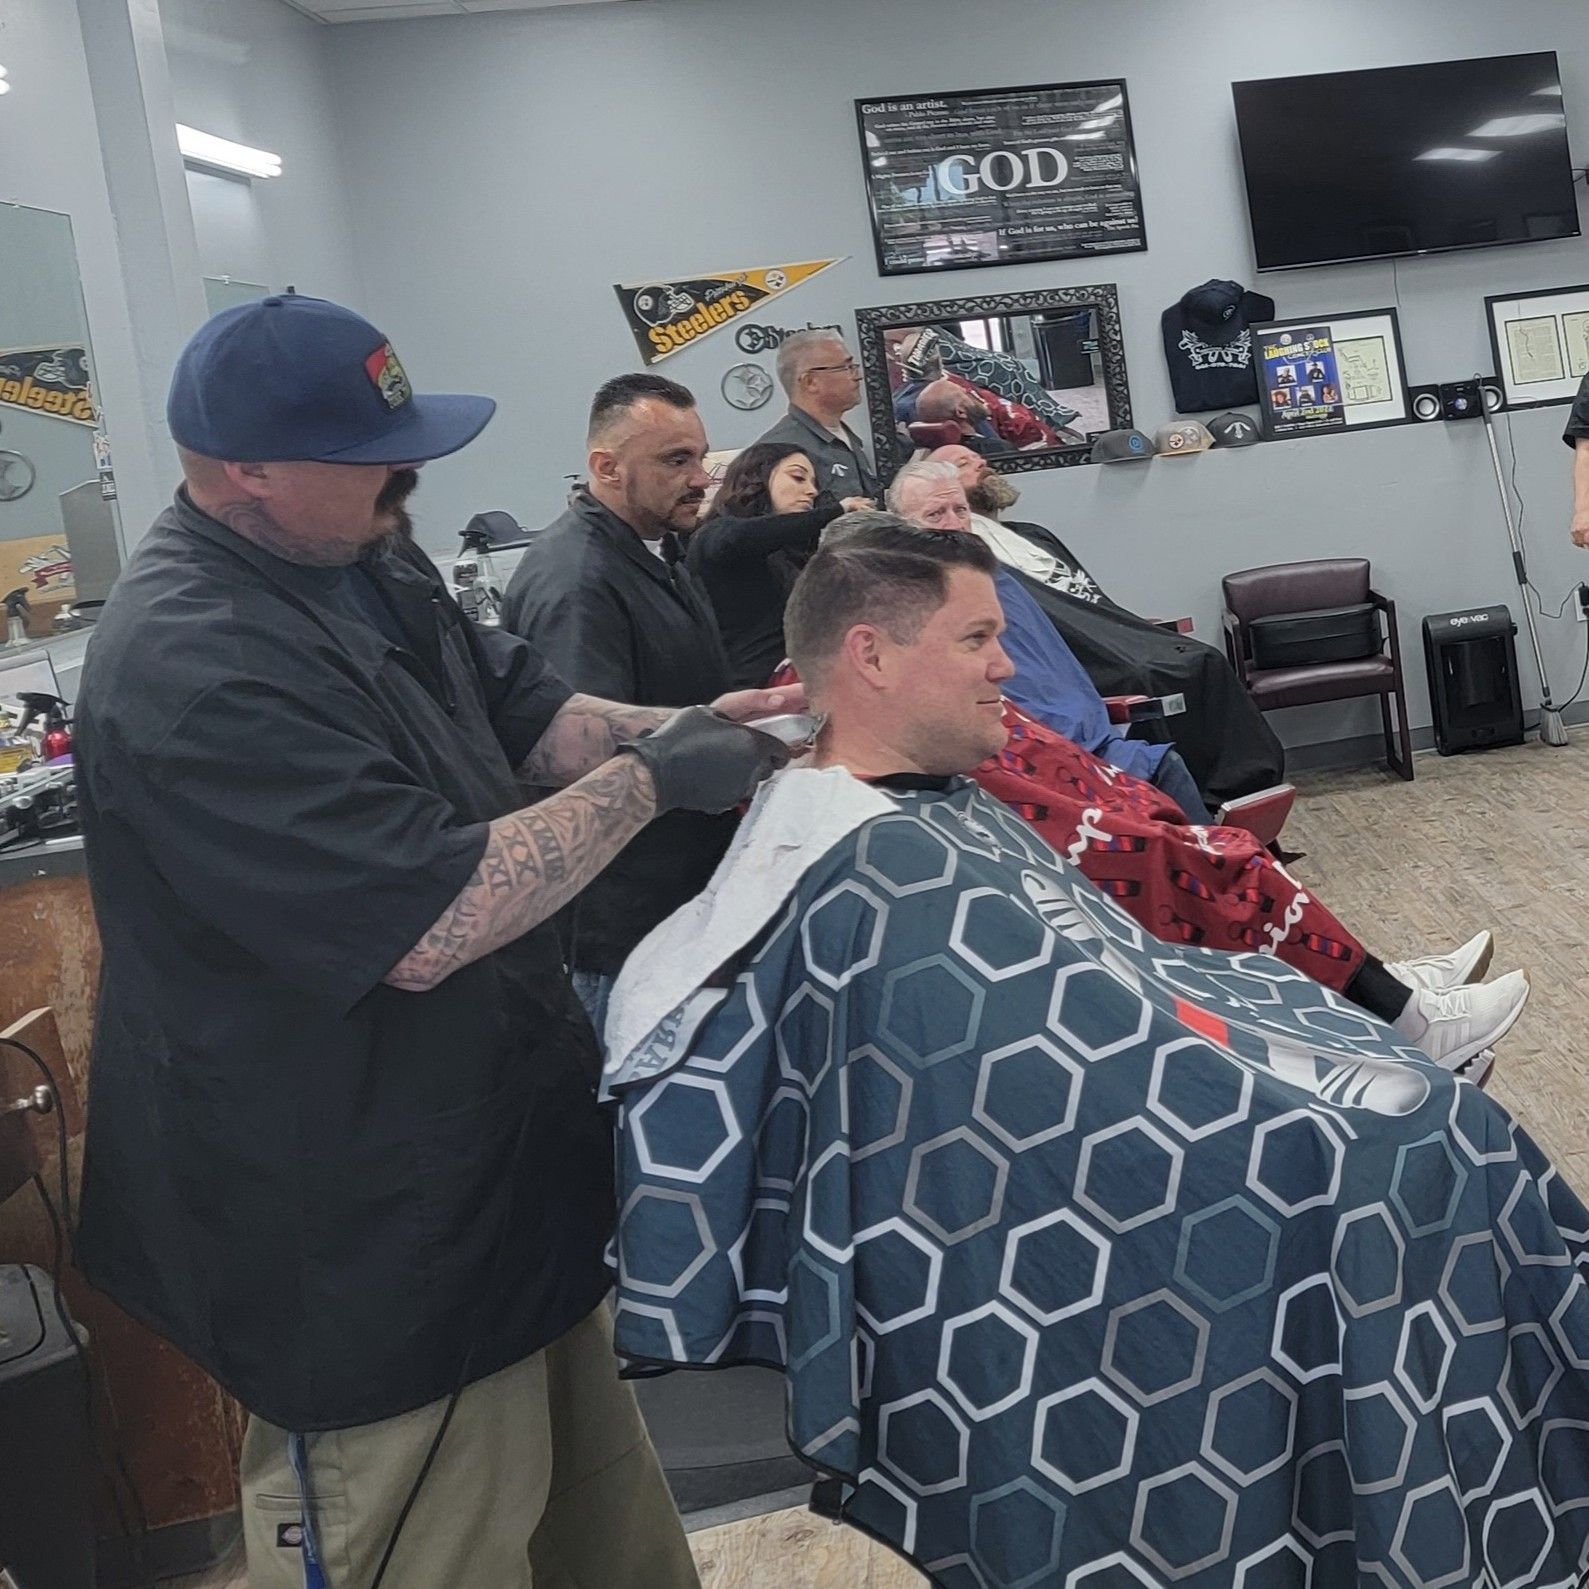 North West Barber Shop, Calloway Dr, 1400, Bakersfield, 93312